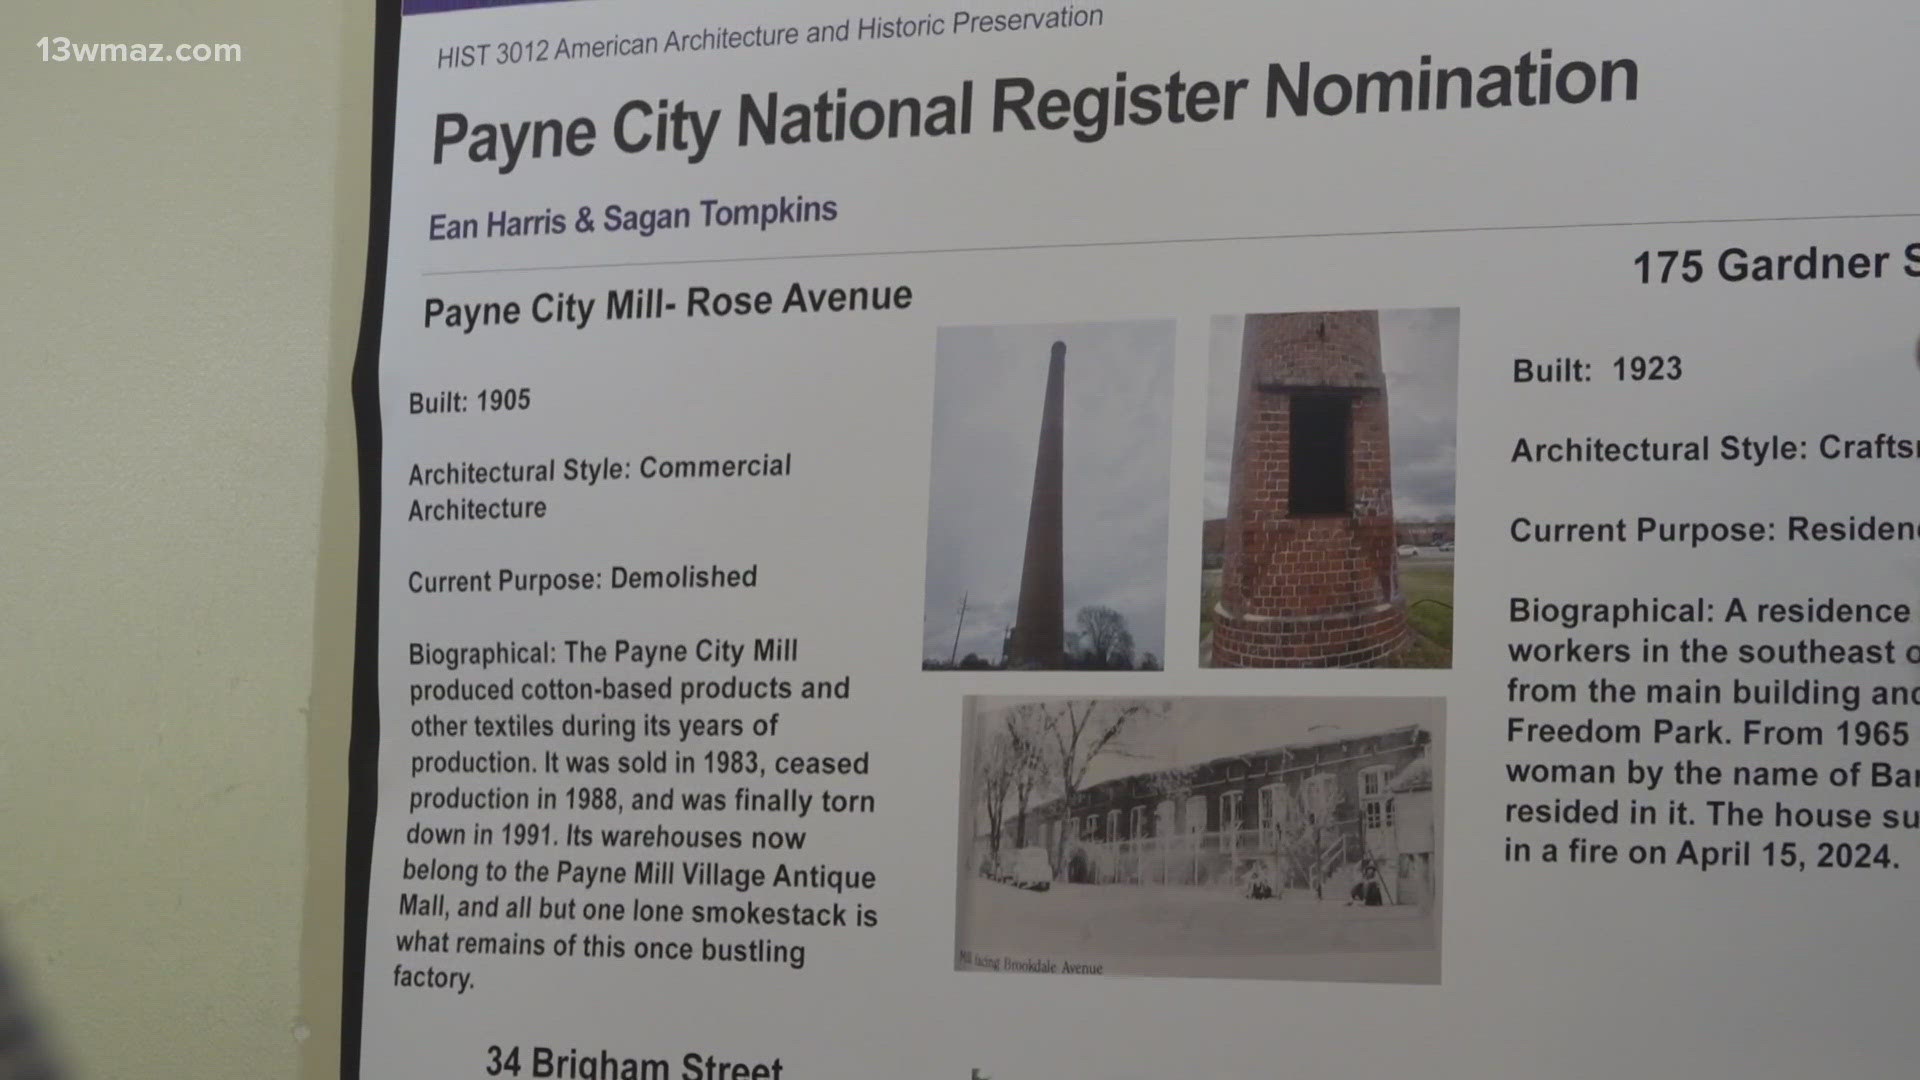 Payne City was a mill village founded in the late 1800s.